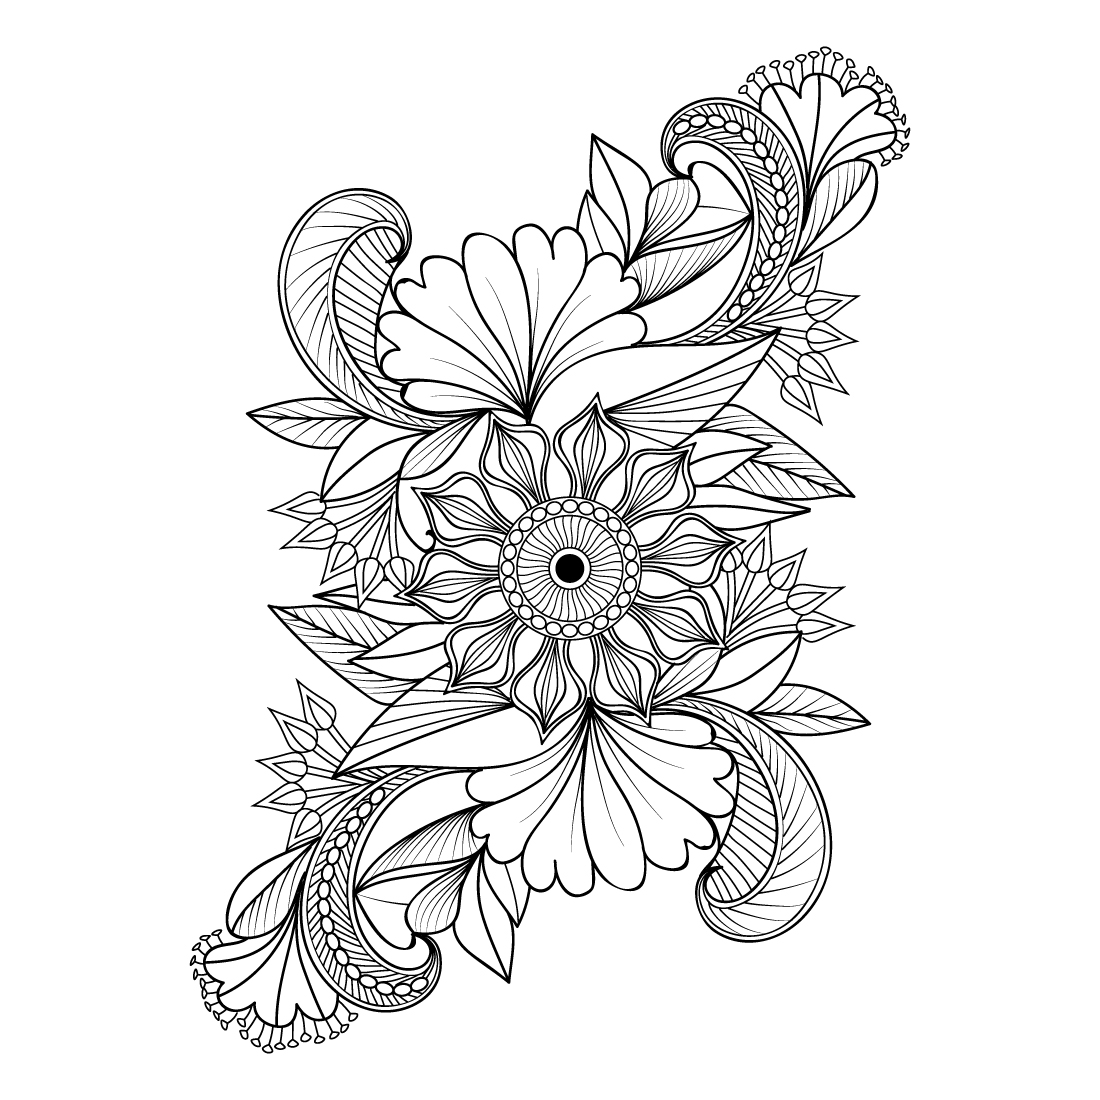 Black and white drawing of flowers.